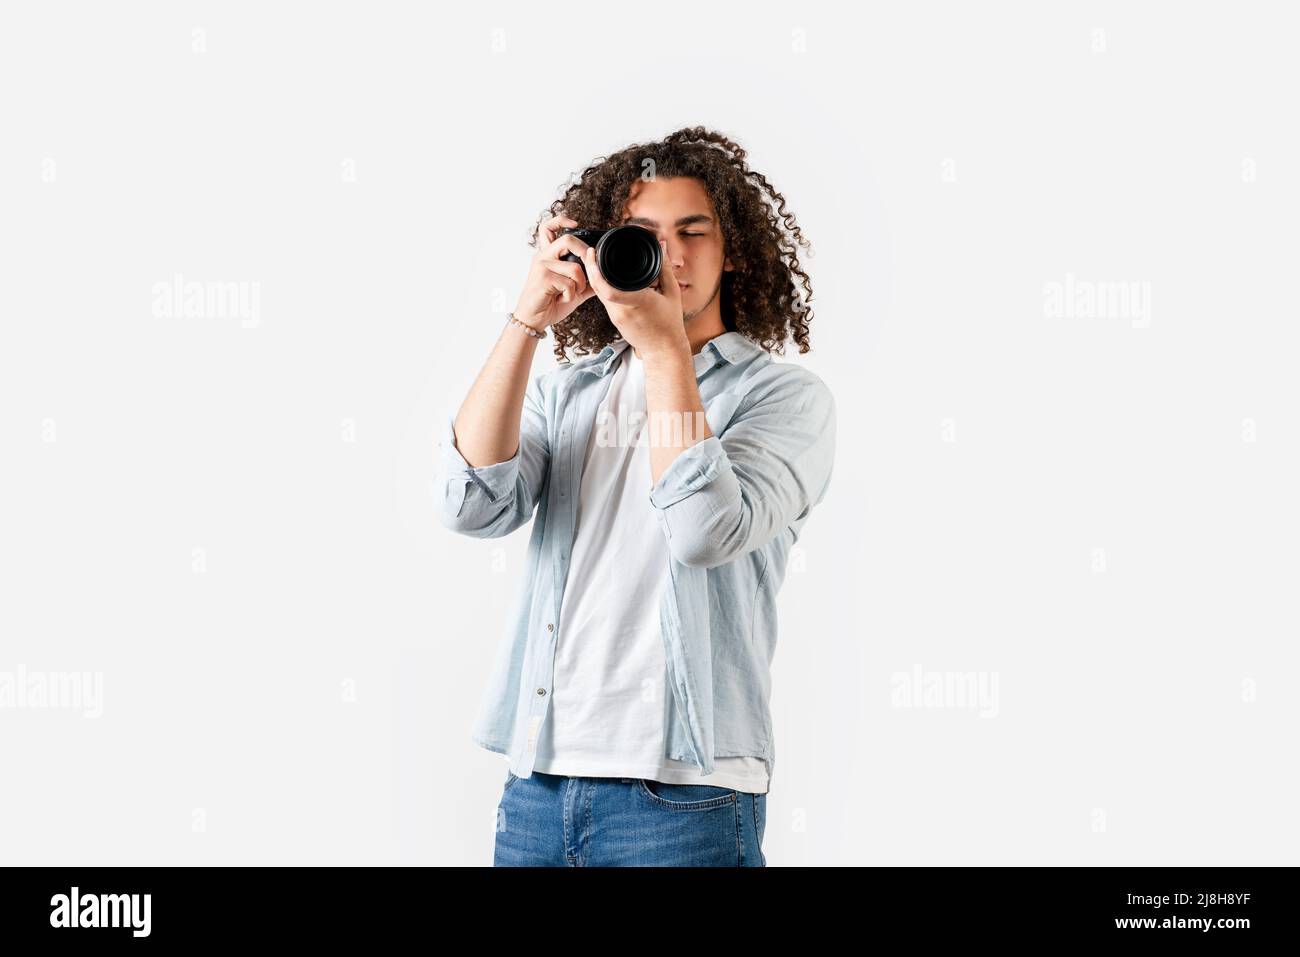 Young man with curly hair is shooting with the camera on his hand. Hobby and photography concept. High quality photo Stock Photo